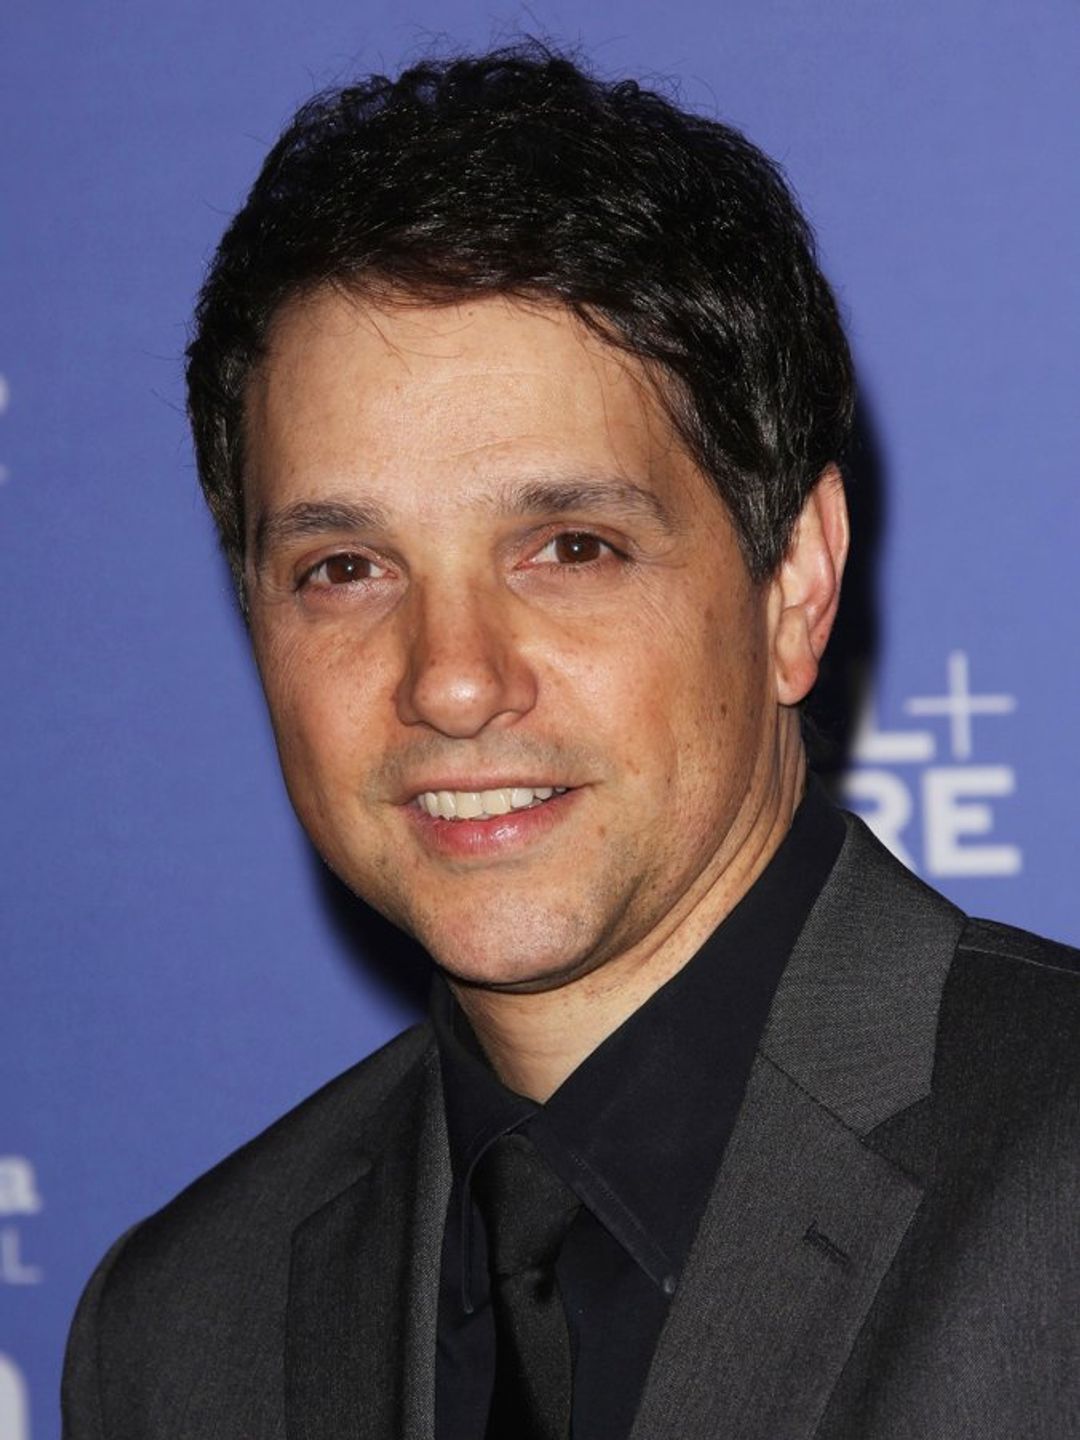 Ralph Macchio how did he became famous